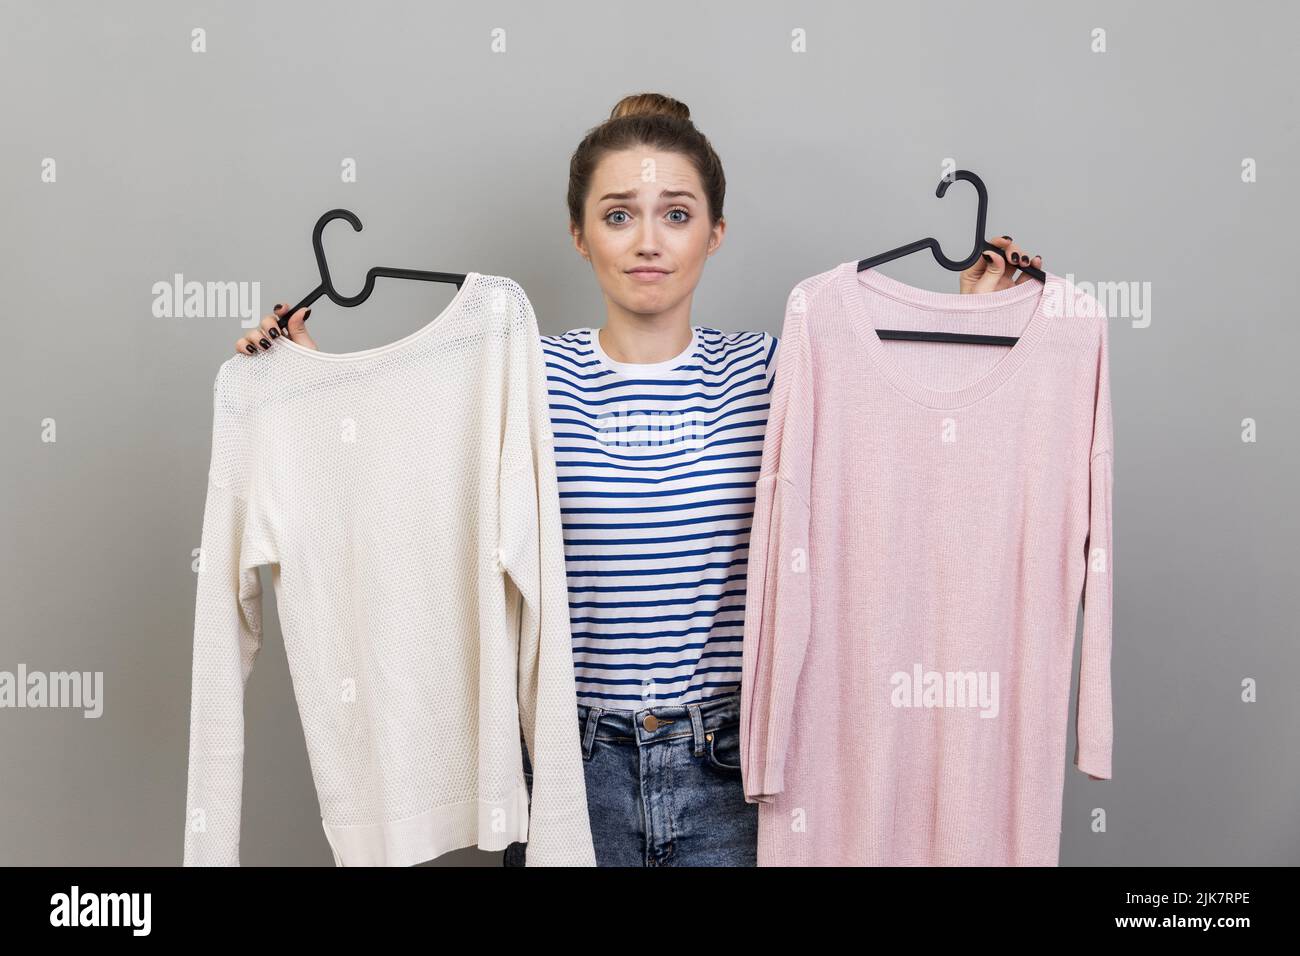 Portrait of confused puzzled woman wearing striped T-shirt holding two shirts on hangers, choosing best look, looking at camera with doubtful expression. Indoor studio shot isolated on gray background Stock Photo